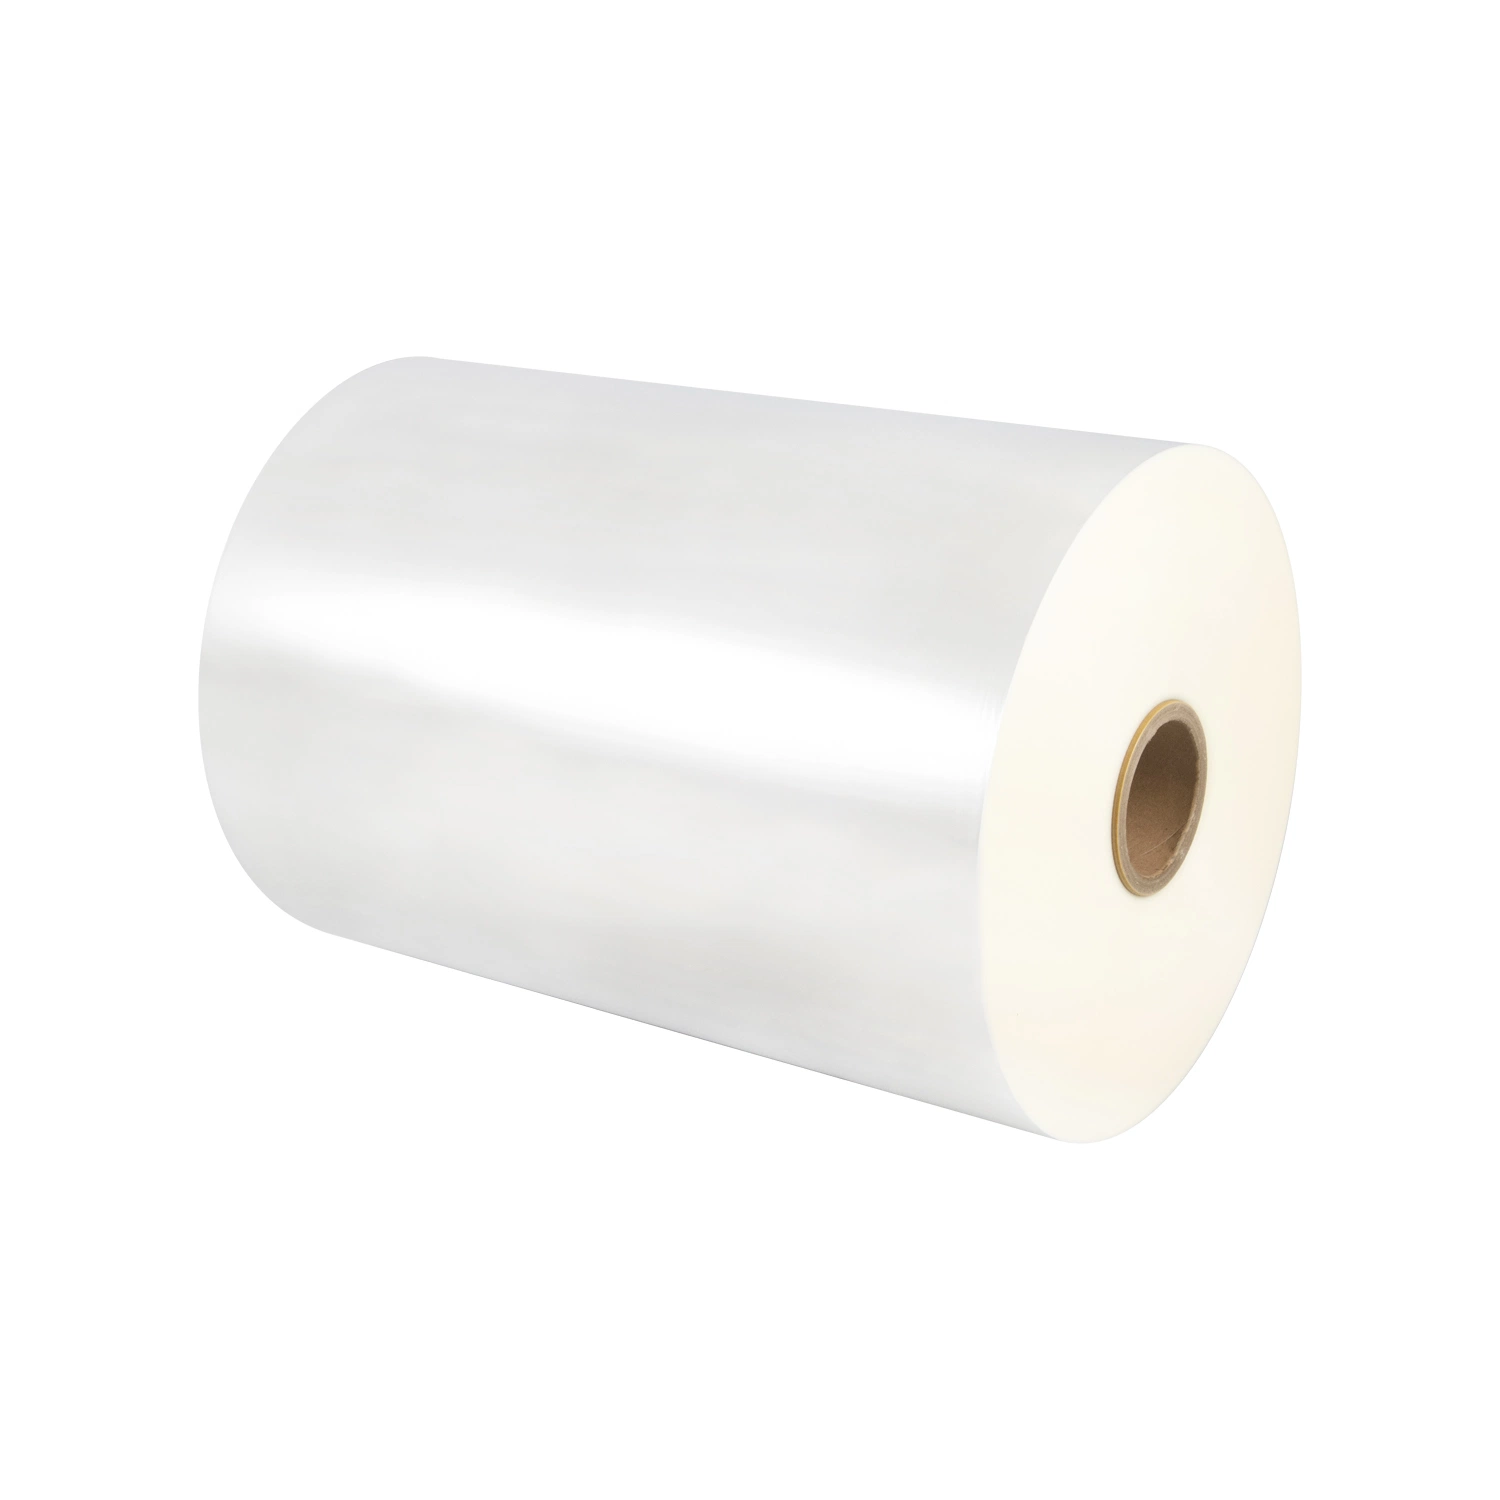 Packaging Material of BOPA/Nylon Film for Printing and Packaging